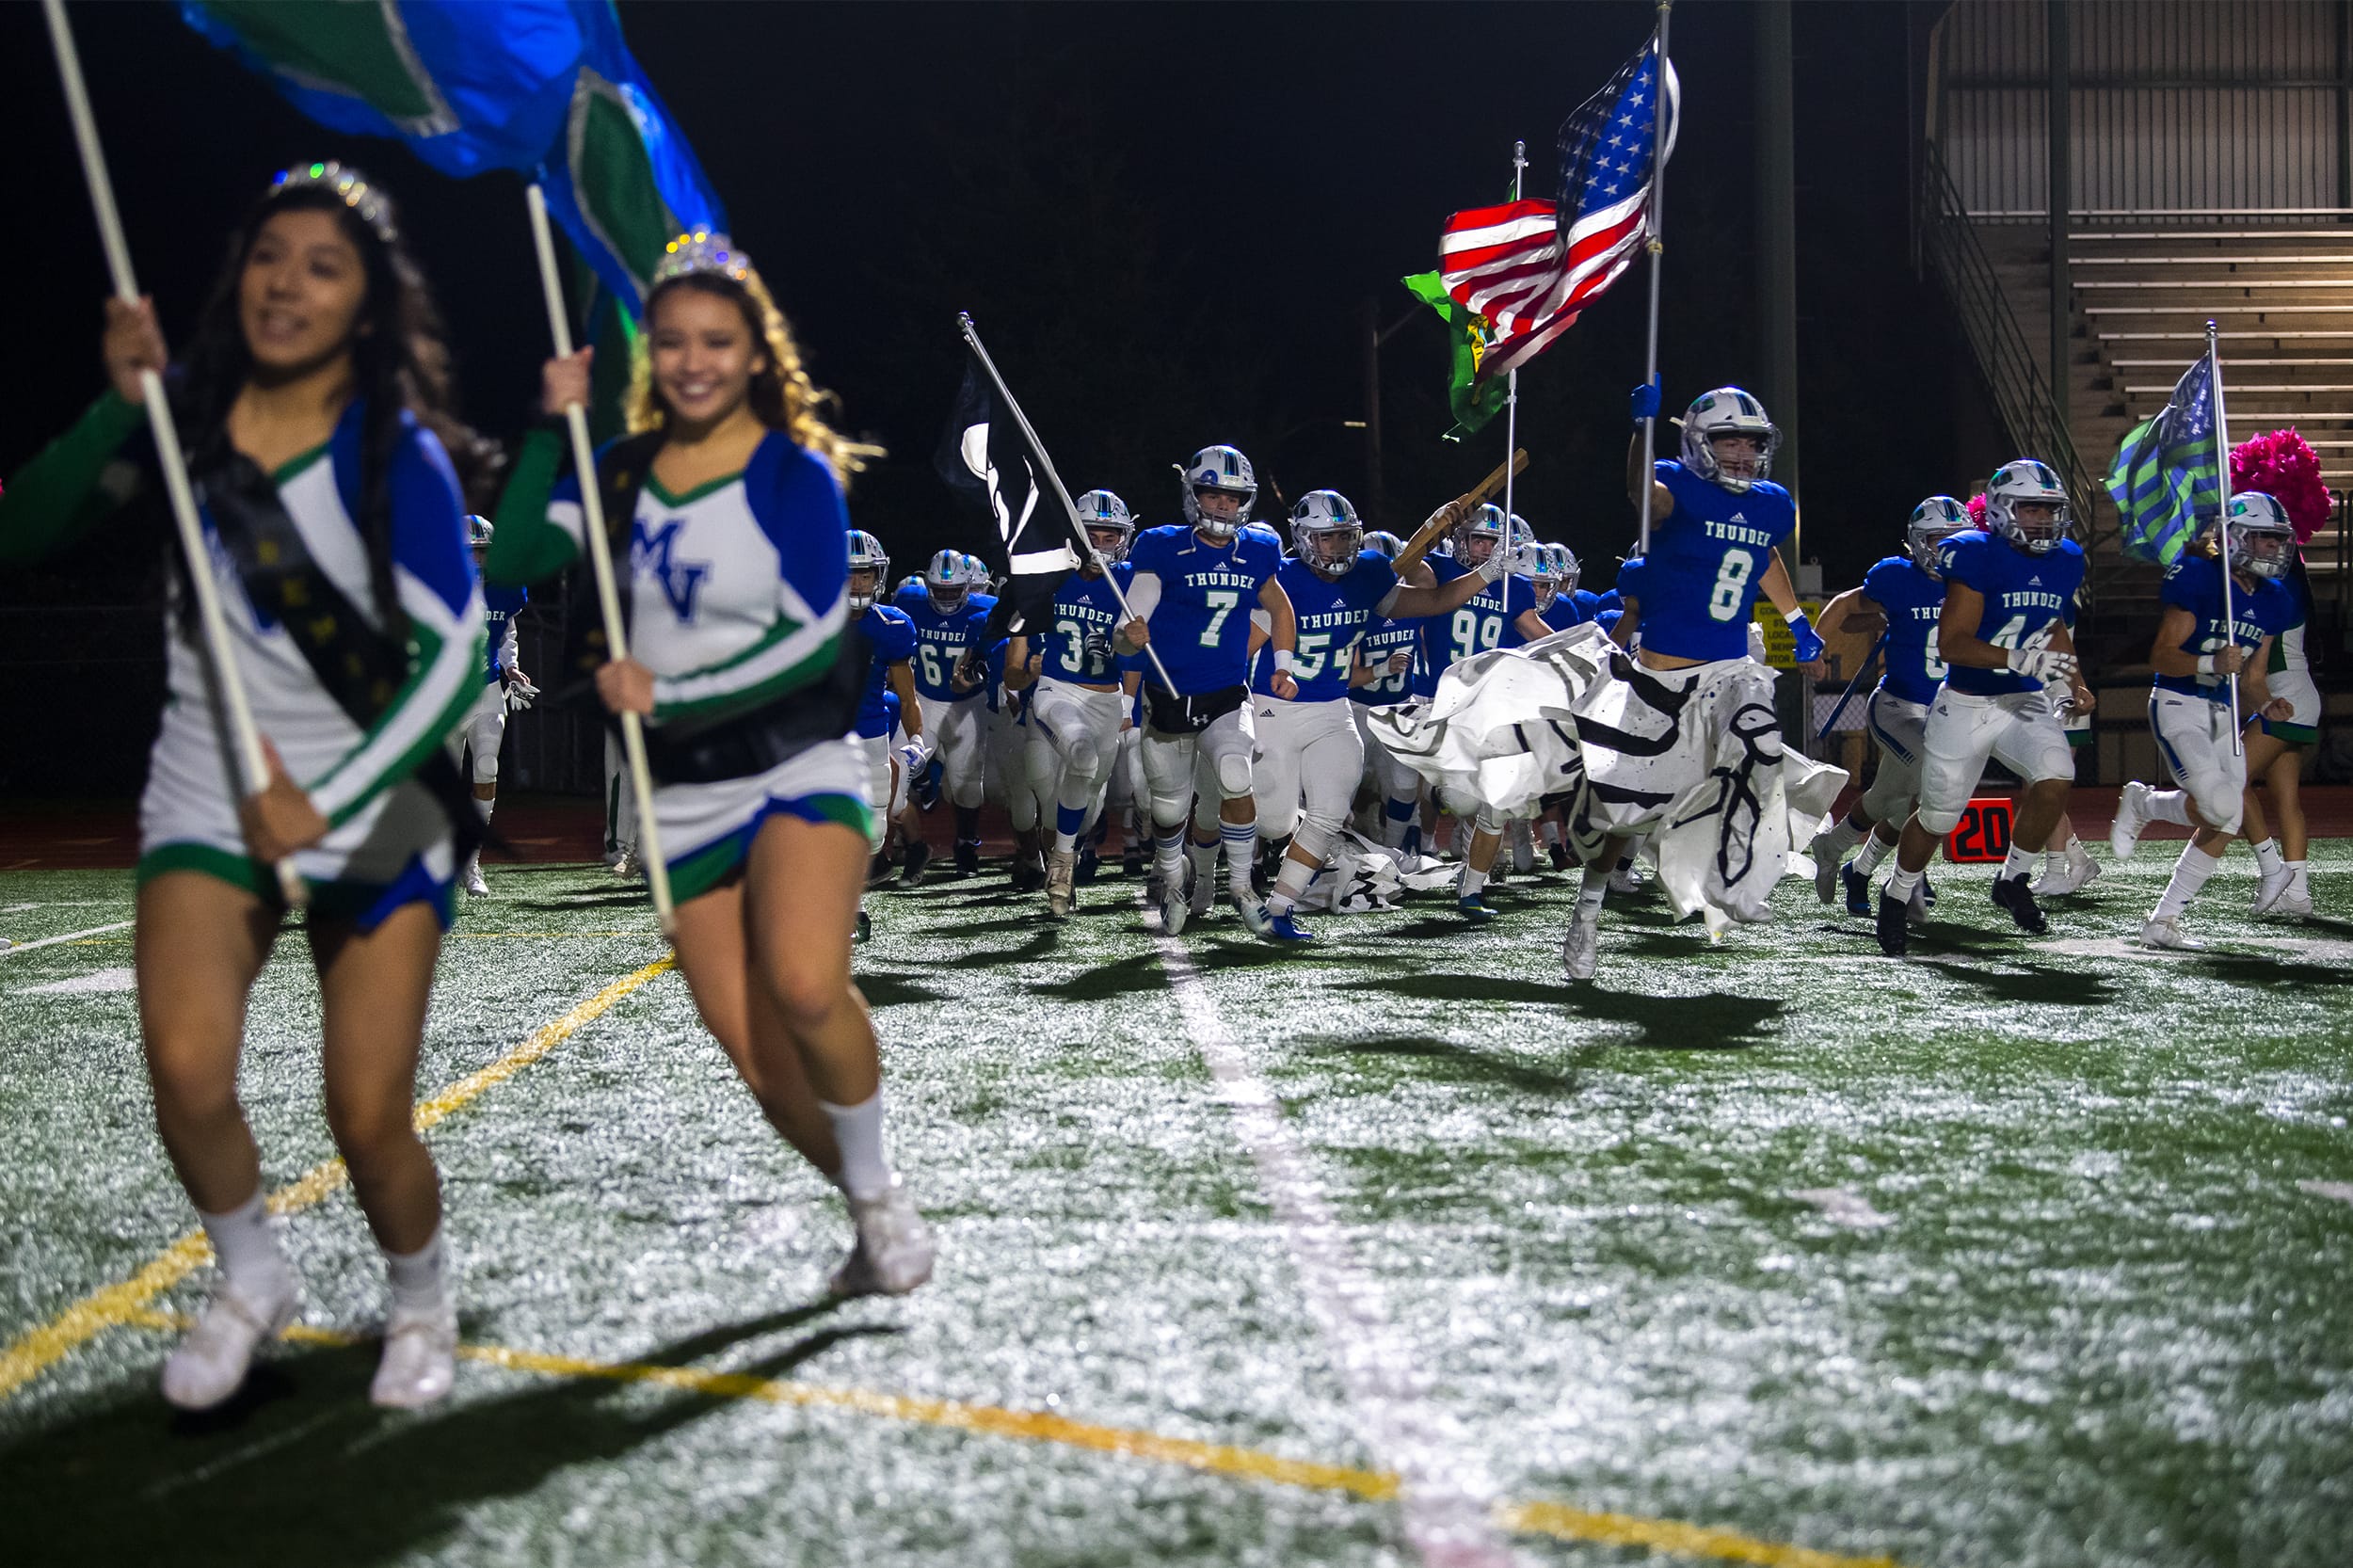 Mountain View runs onto the field before a game against Kelso at McKenzie Stadium on Friday night, Oct. 25, 2019.